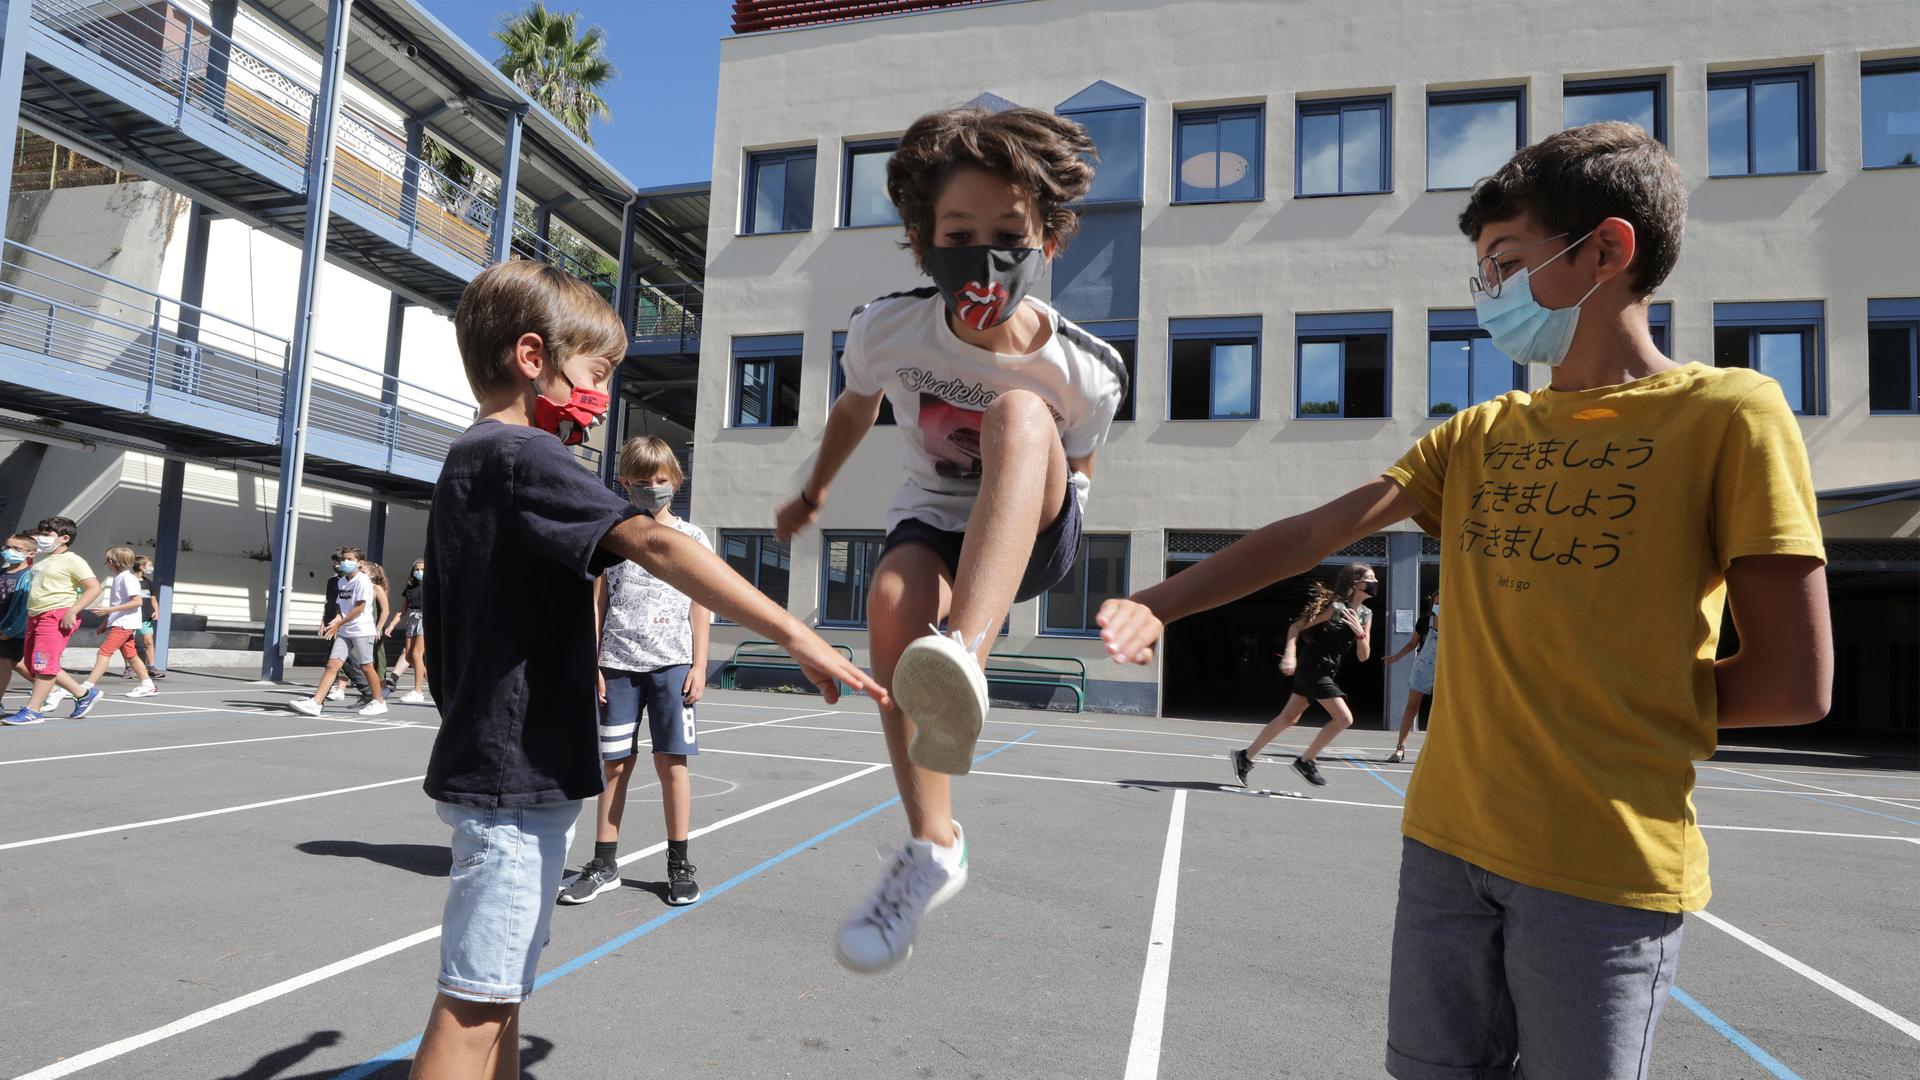 Secondary school students play in the courtyard at the College Henri Matisse school during its reopening in Nice as French children return to their schools after the summer break.